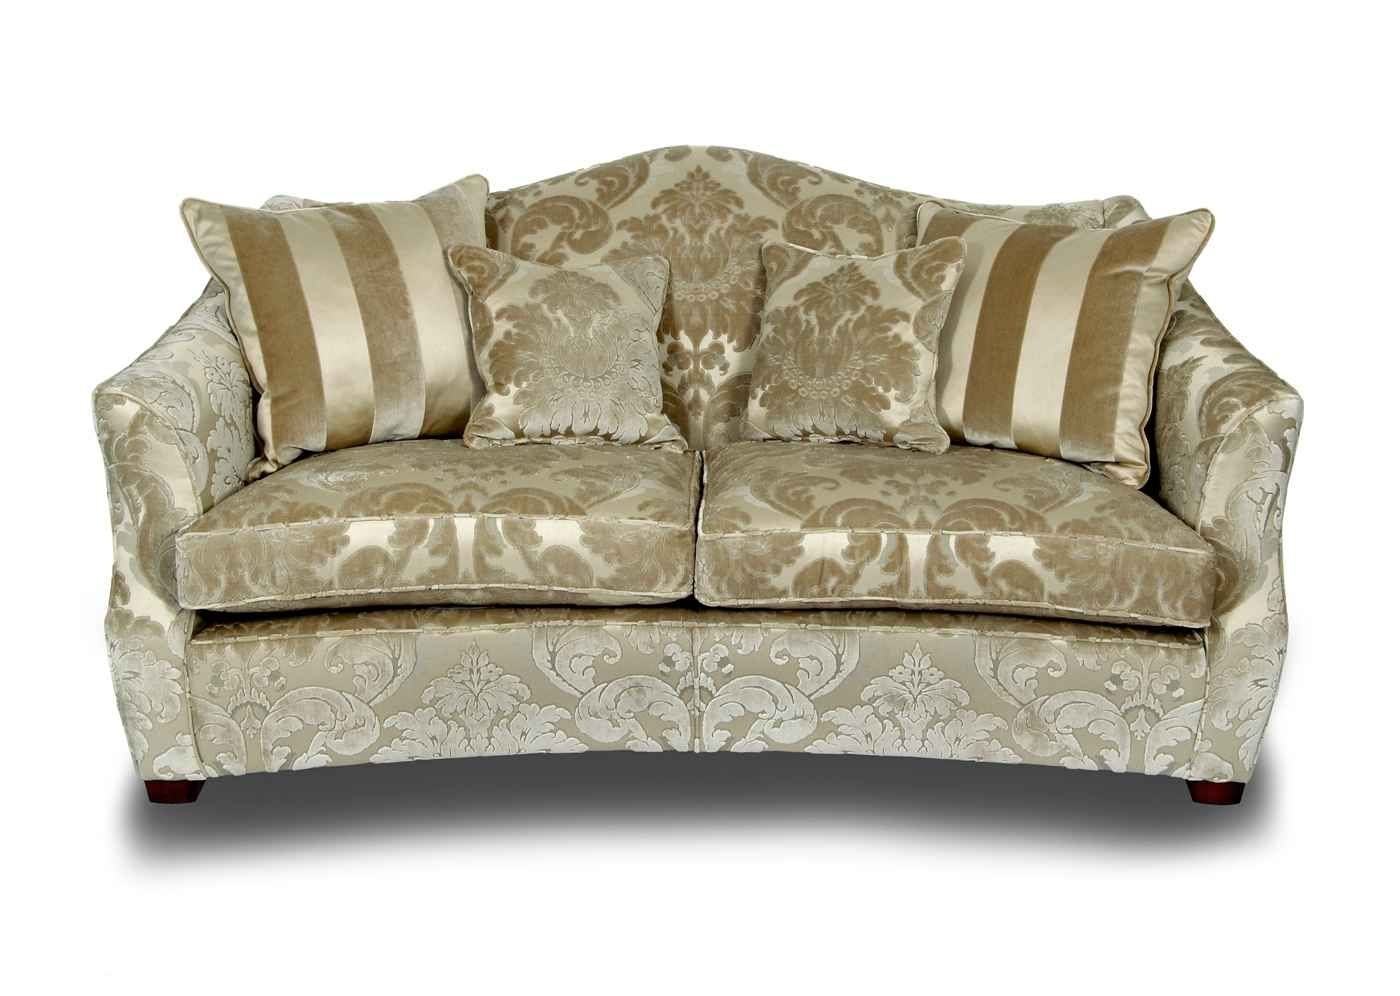 55 Fabric Sofas Living Room Fabric Three Cushion Sofa 7305 31 At Intended For Elegant Fabric Sofas (View 6 of 12)